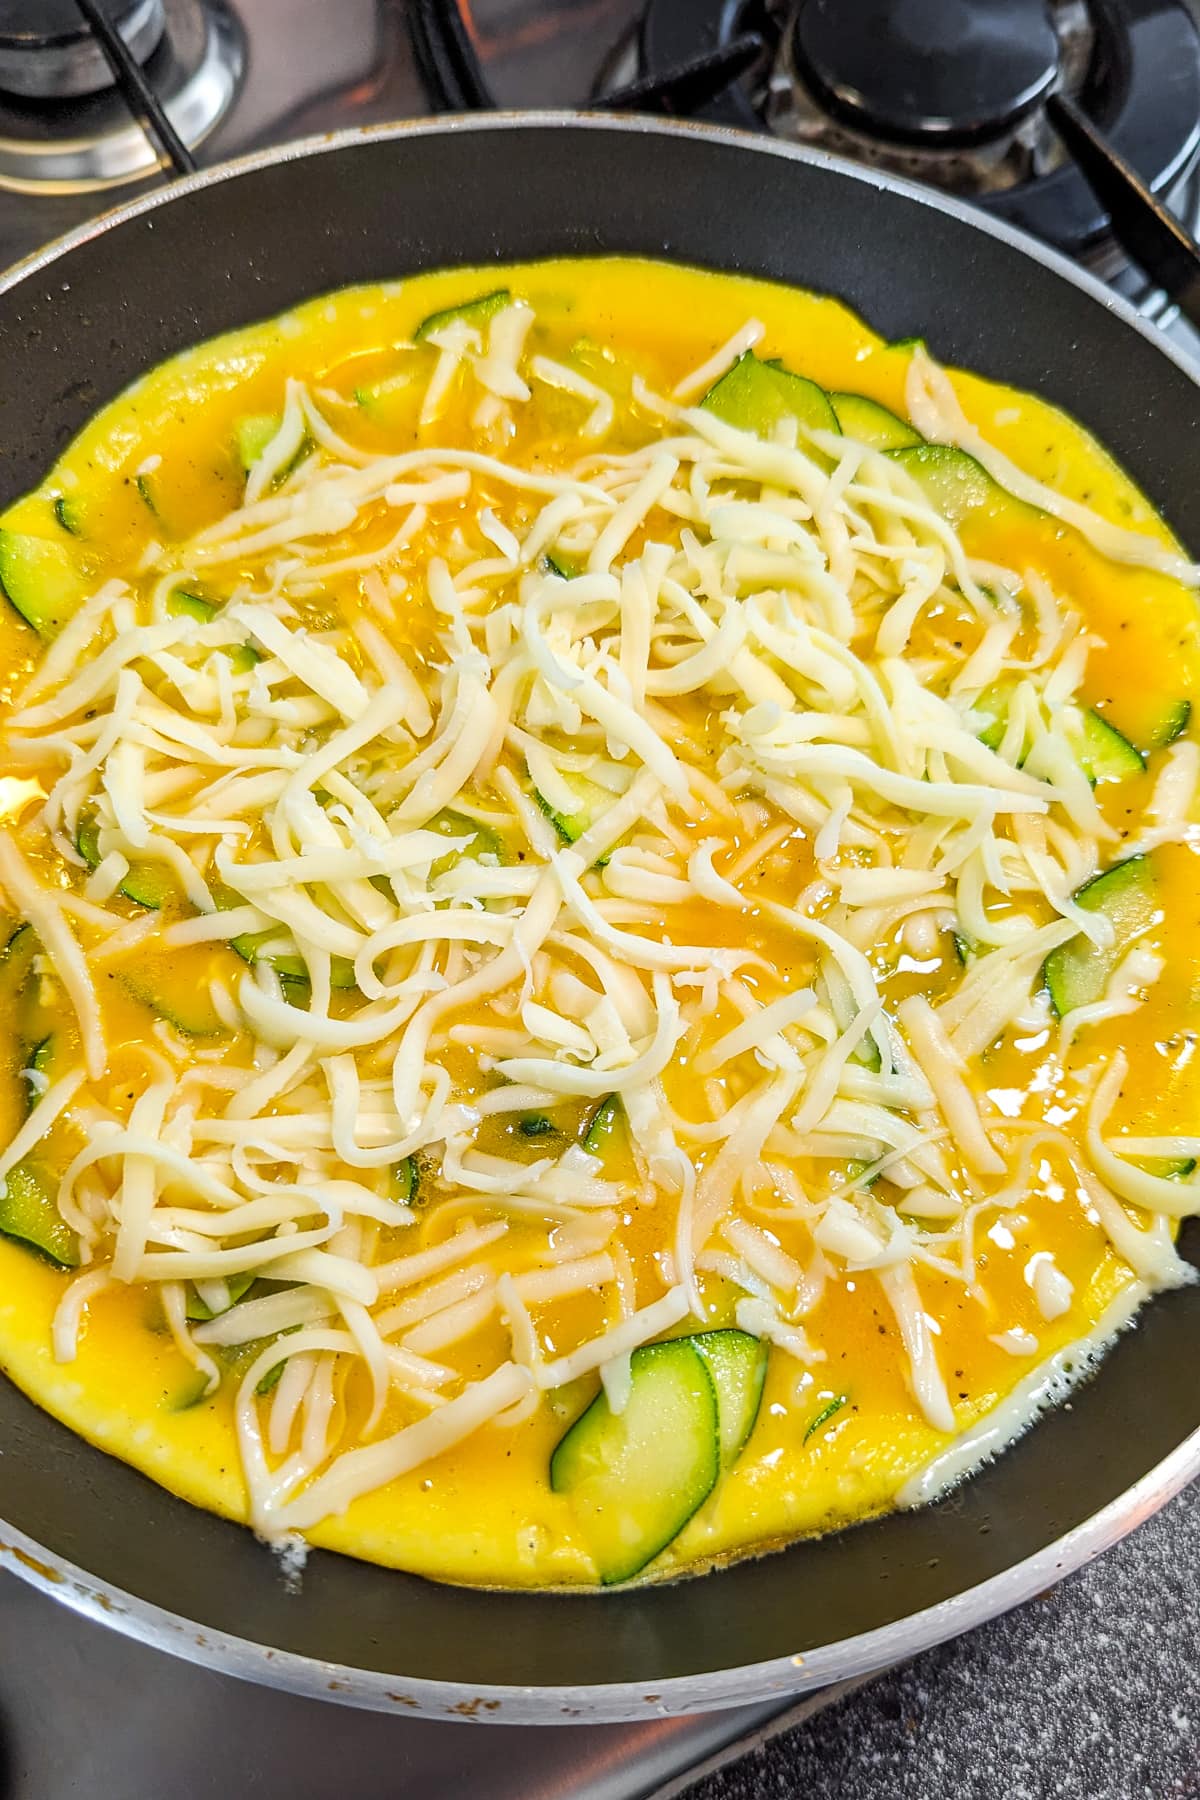 Raw zucchini frittata in a frying pan on the stove.